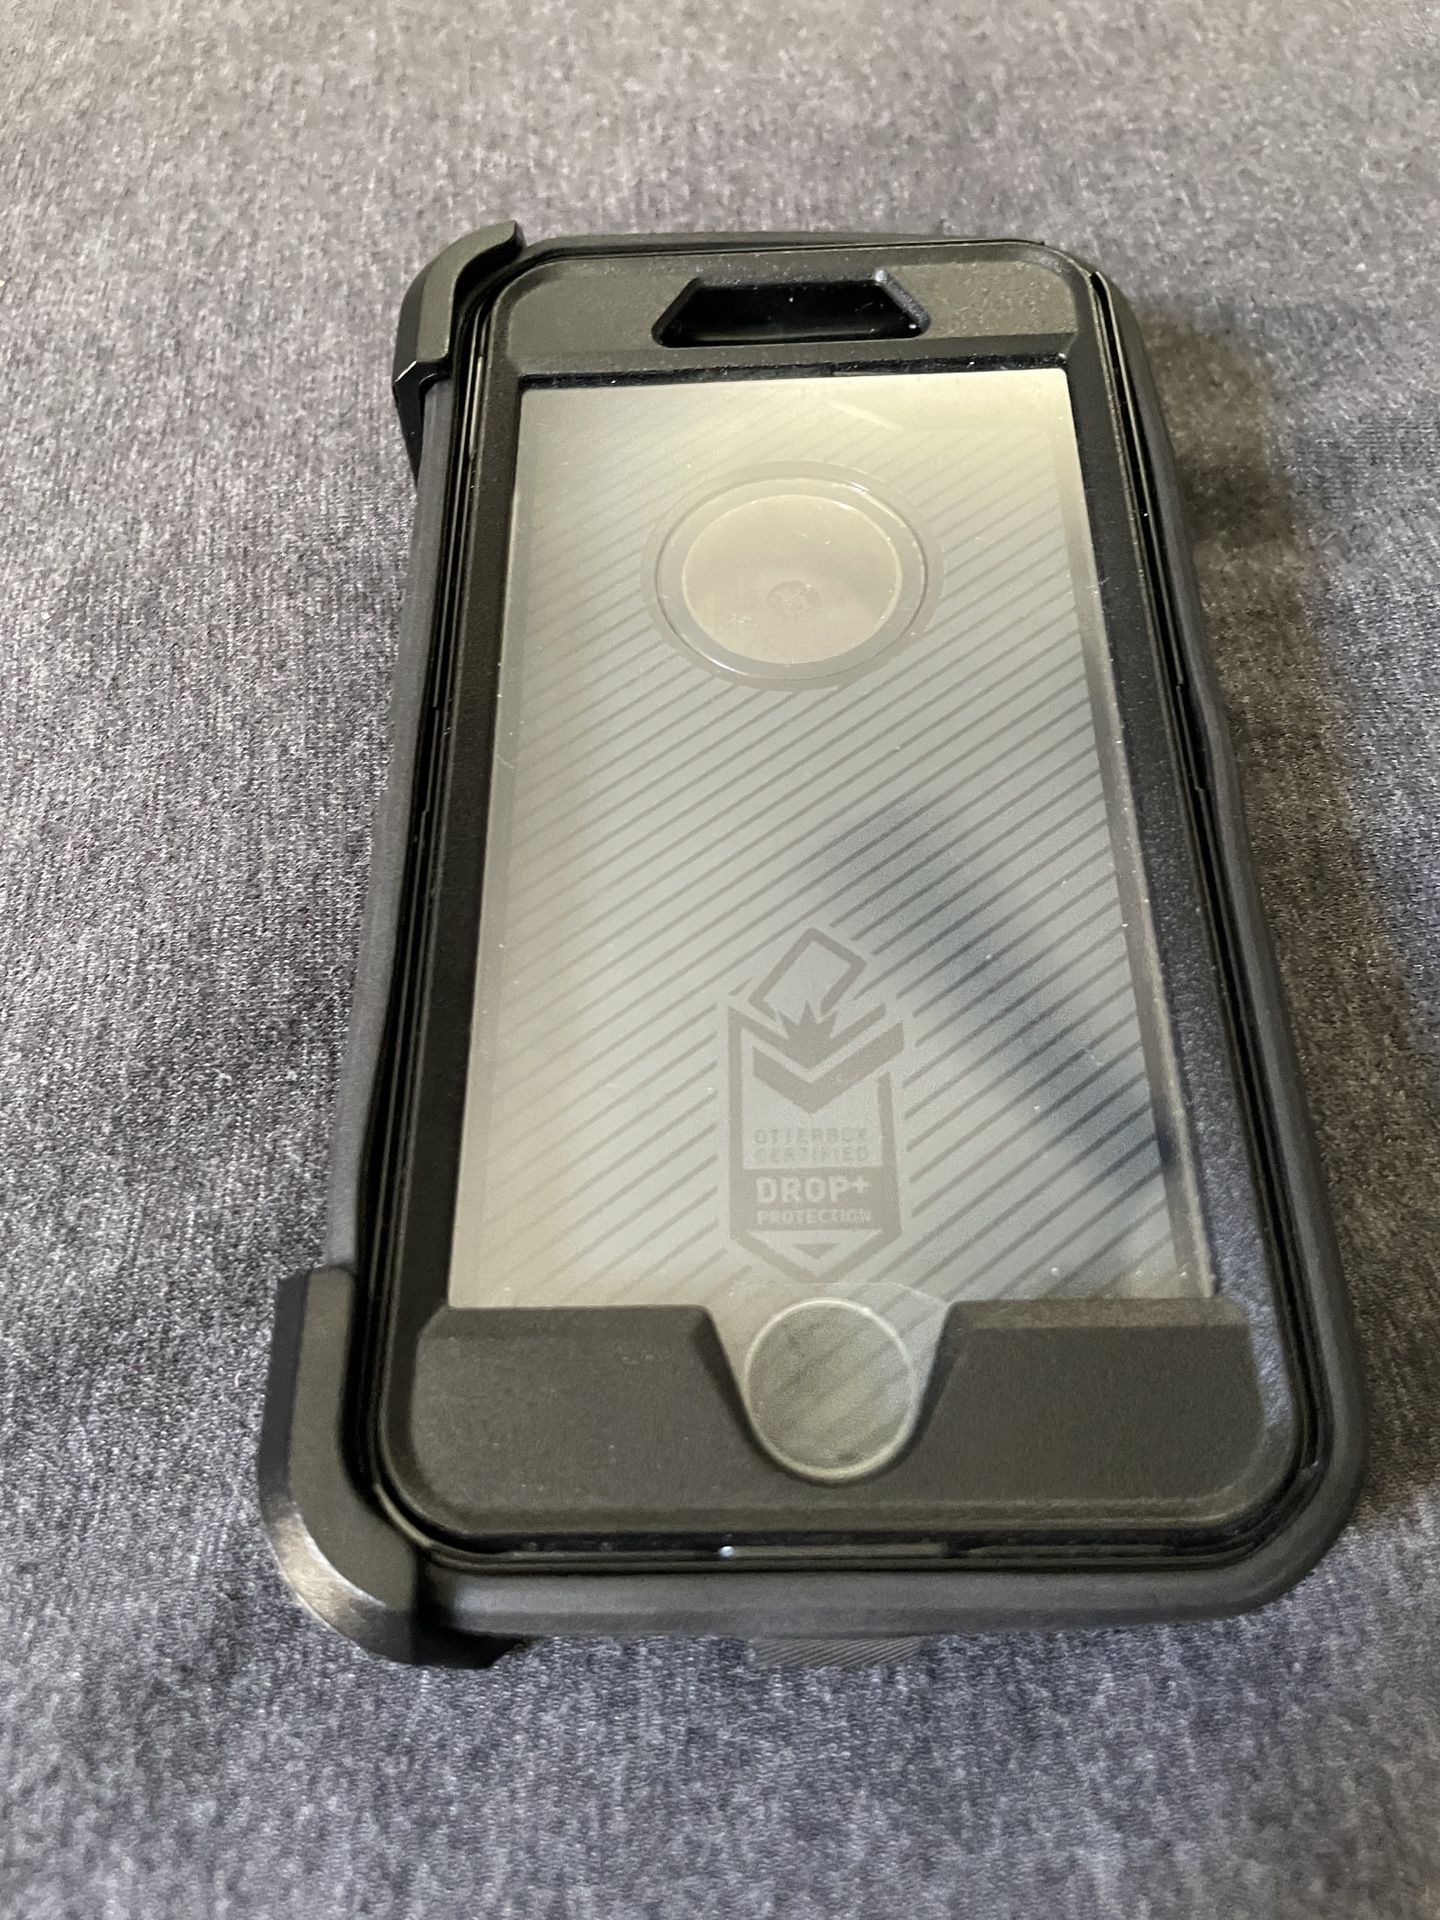 Brand New Otterbox Defender Case For iPhone 7 Or 8 